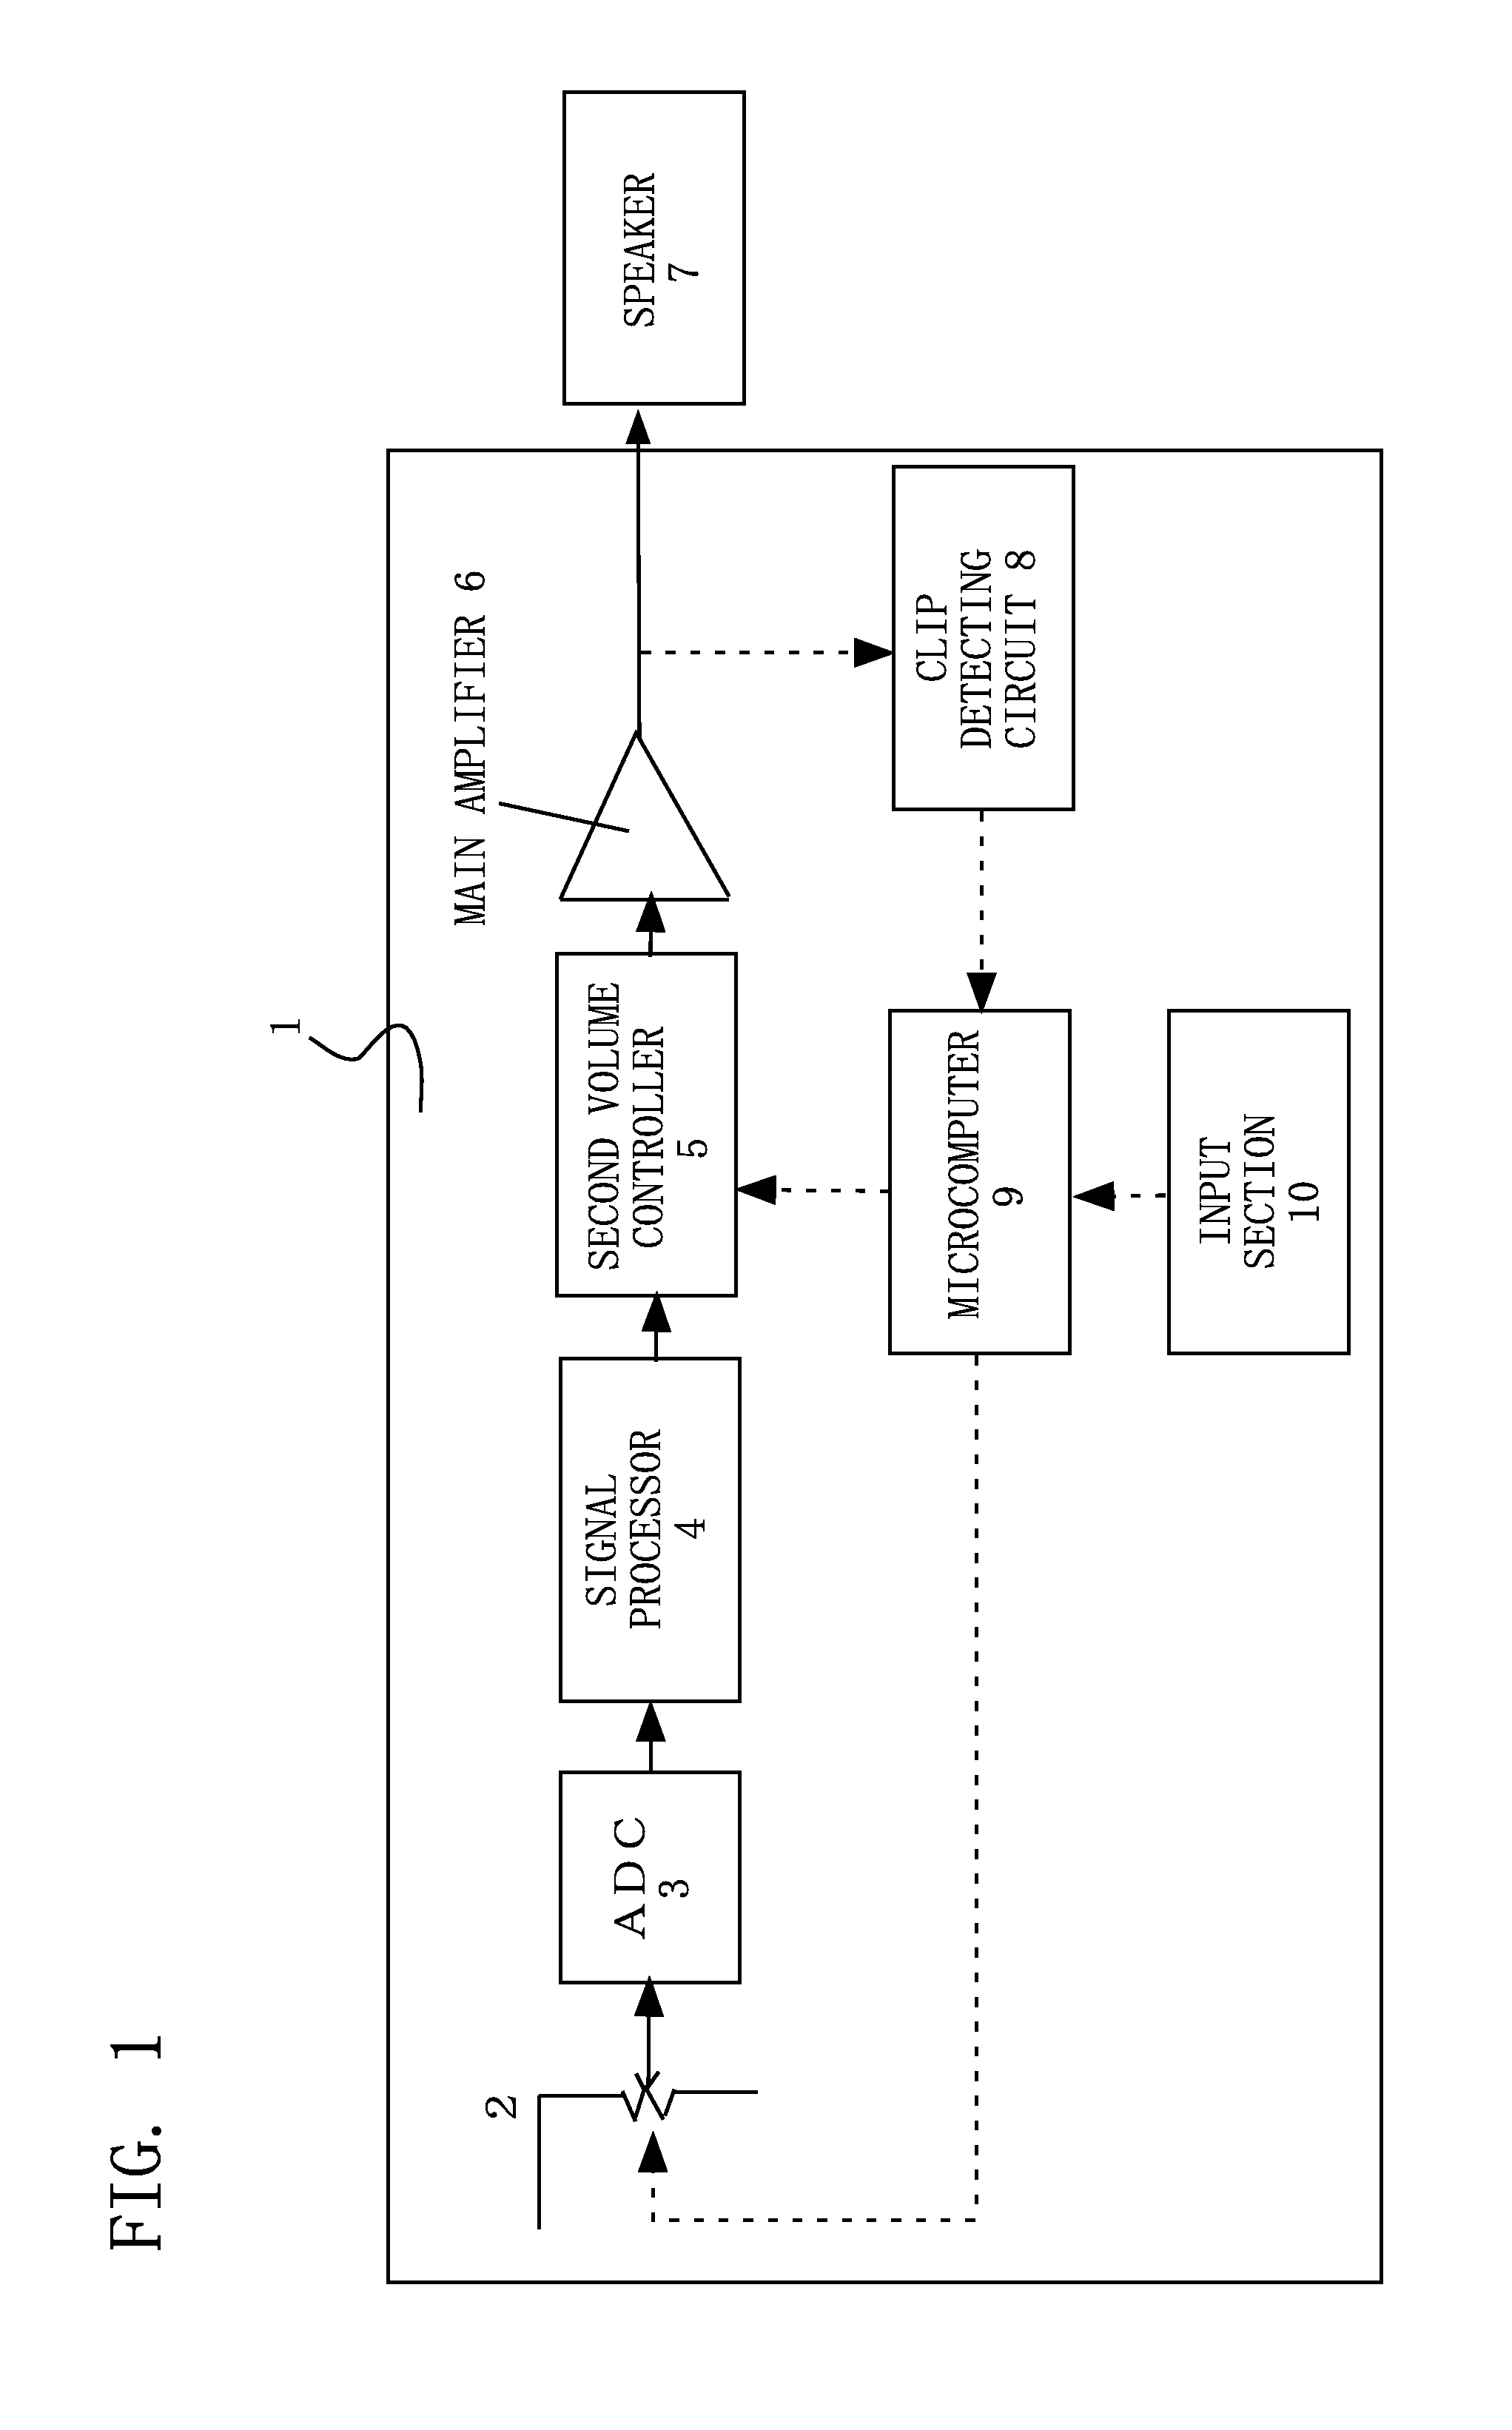 Volume control apparatus with first and second controllers